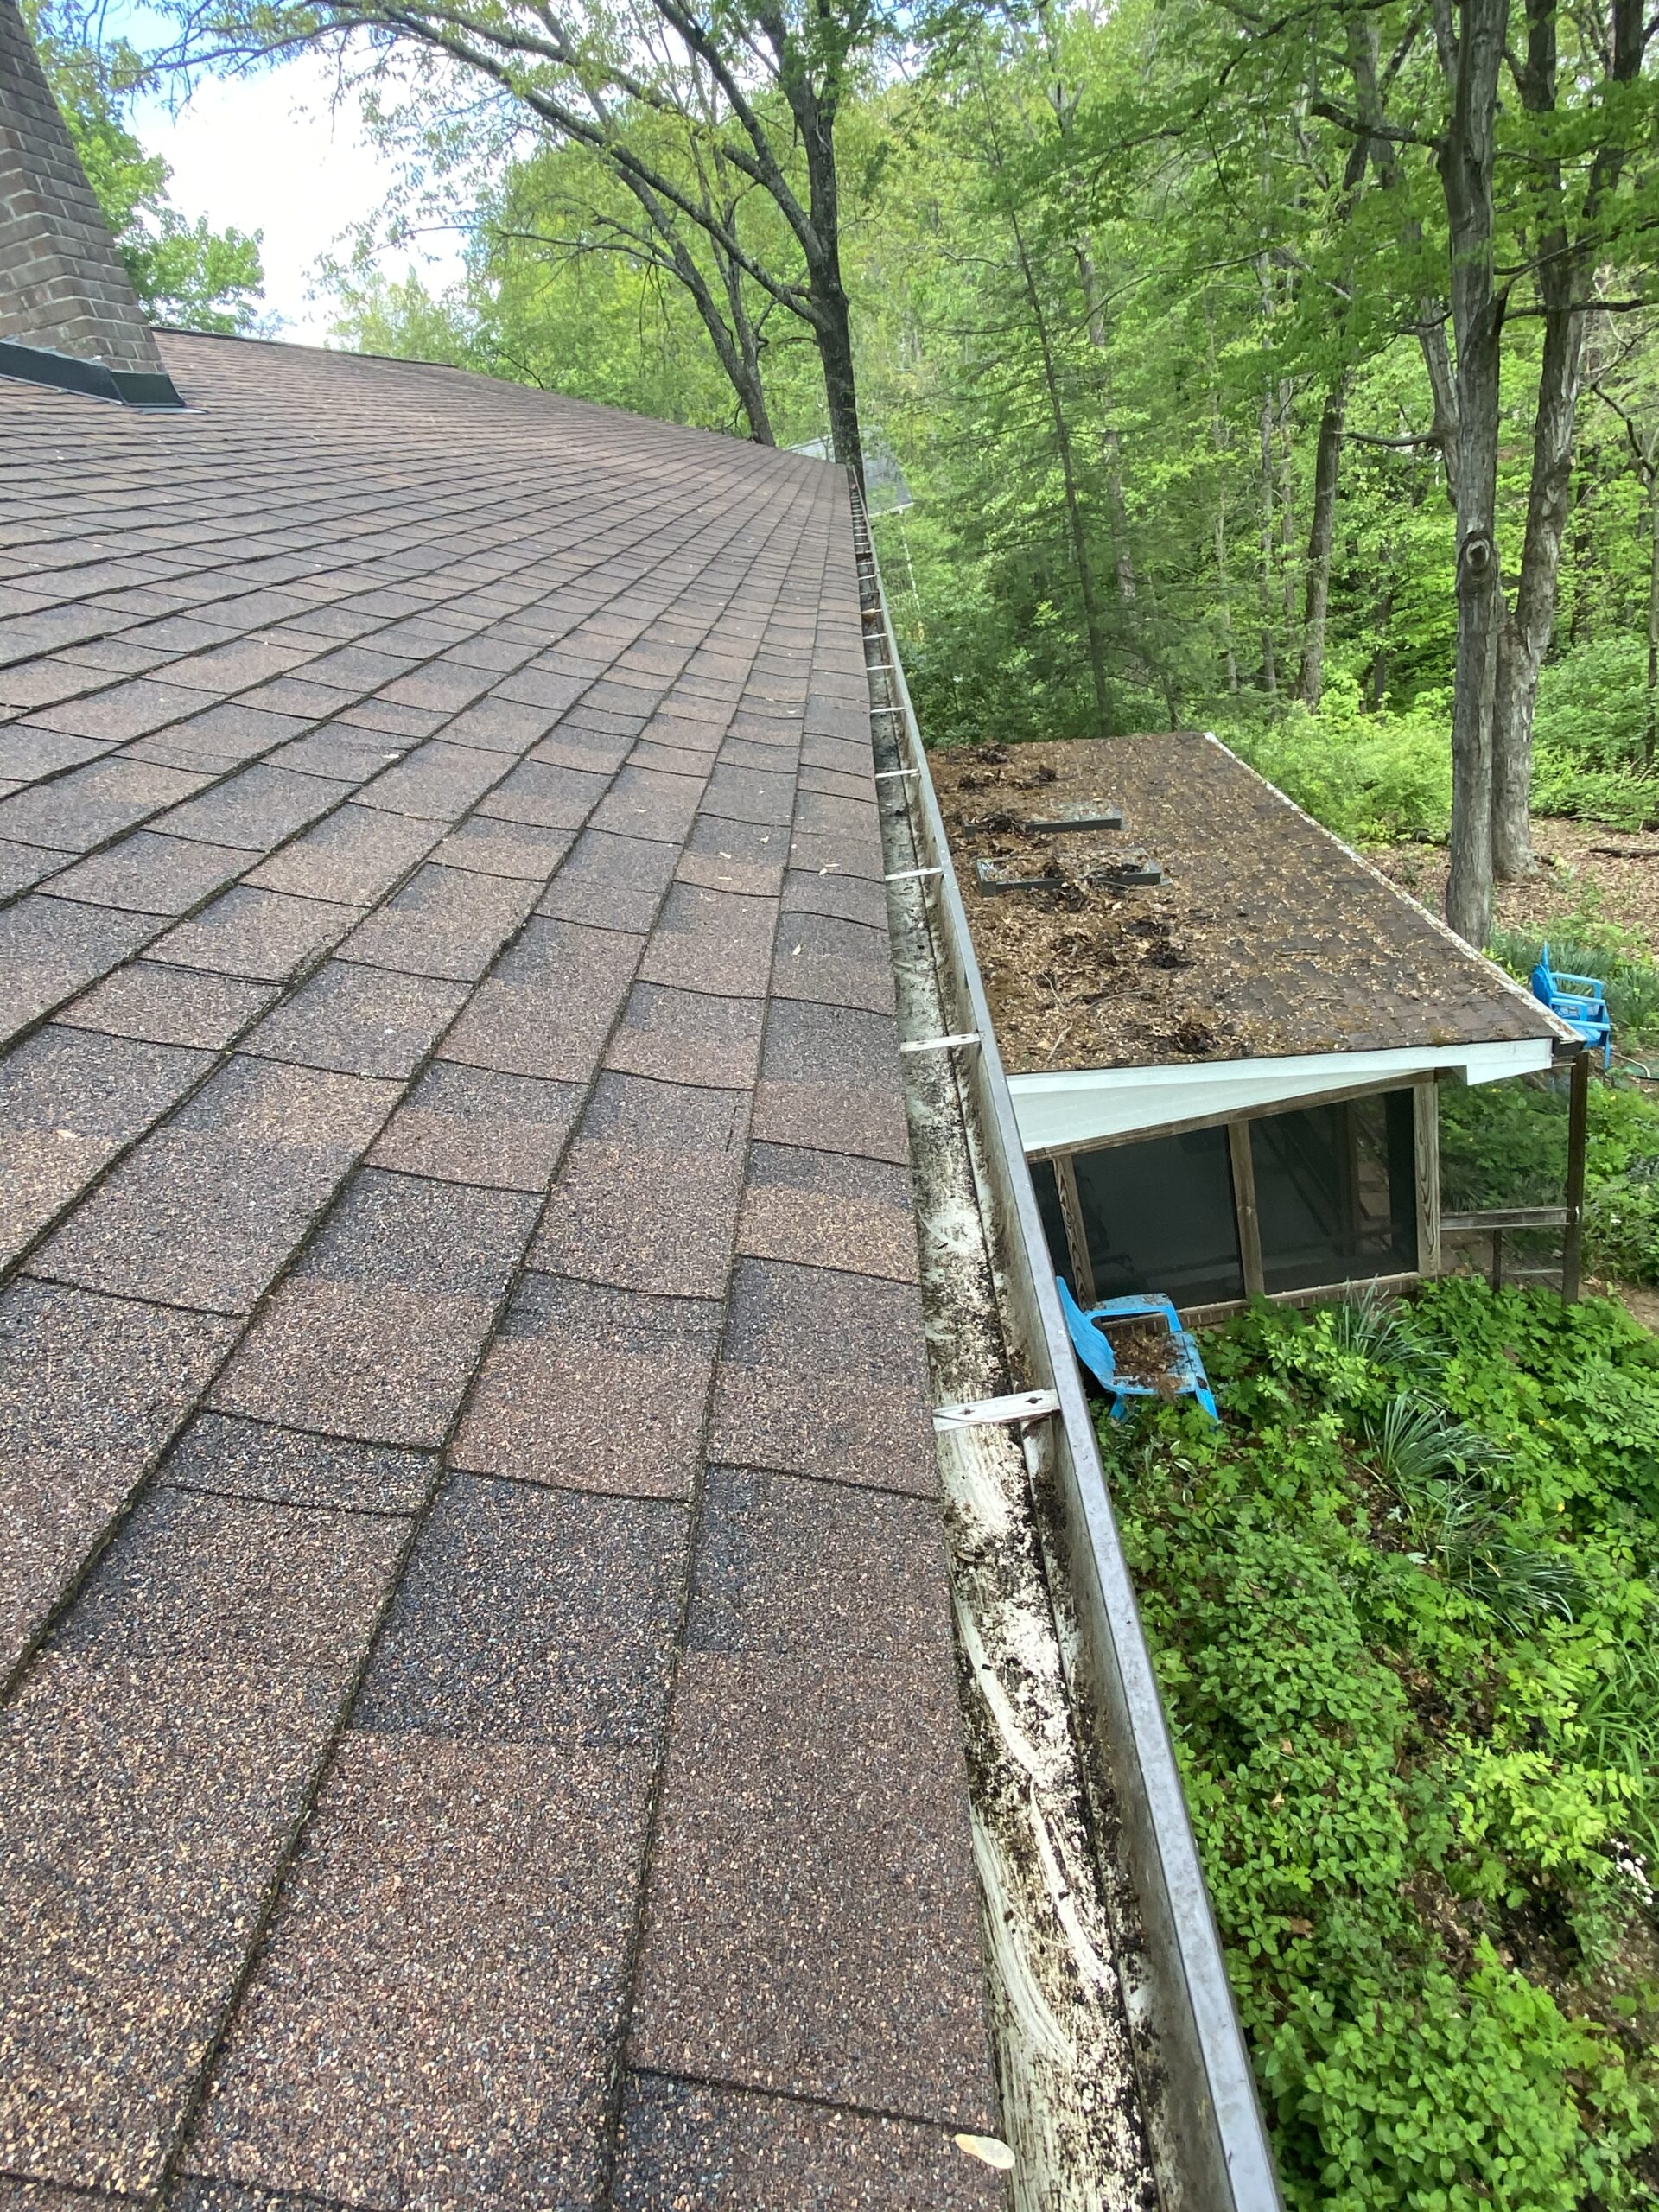 This is a picture of a gutter that has been cleaned out